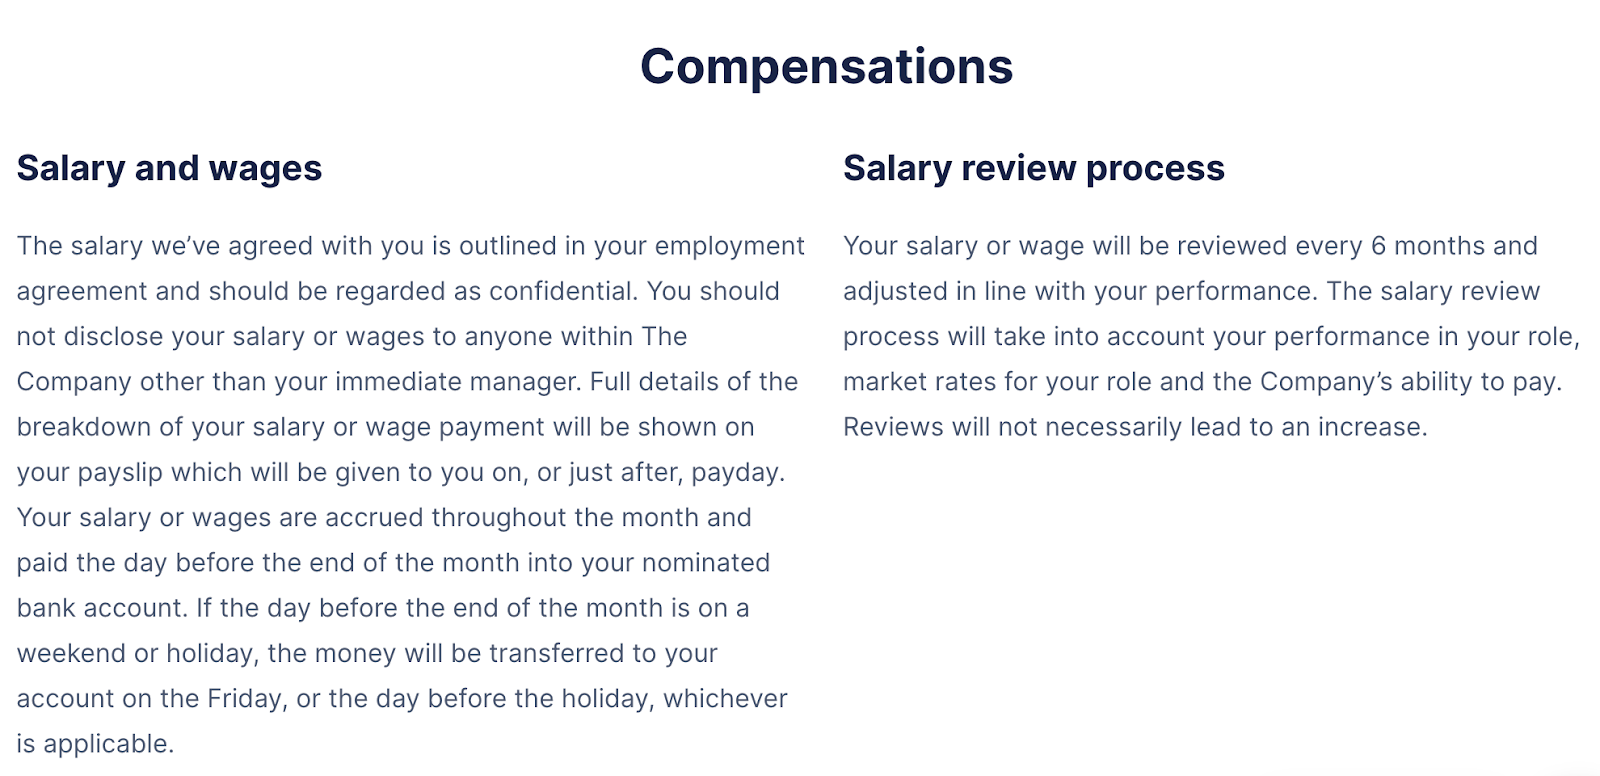 Employee compensation policy example: Pronto Marketing